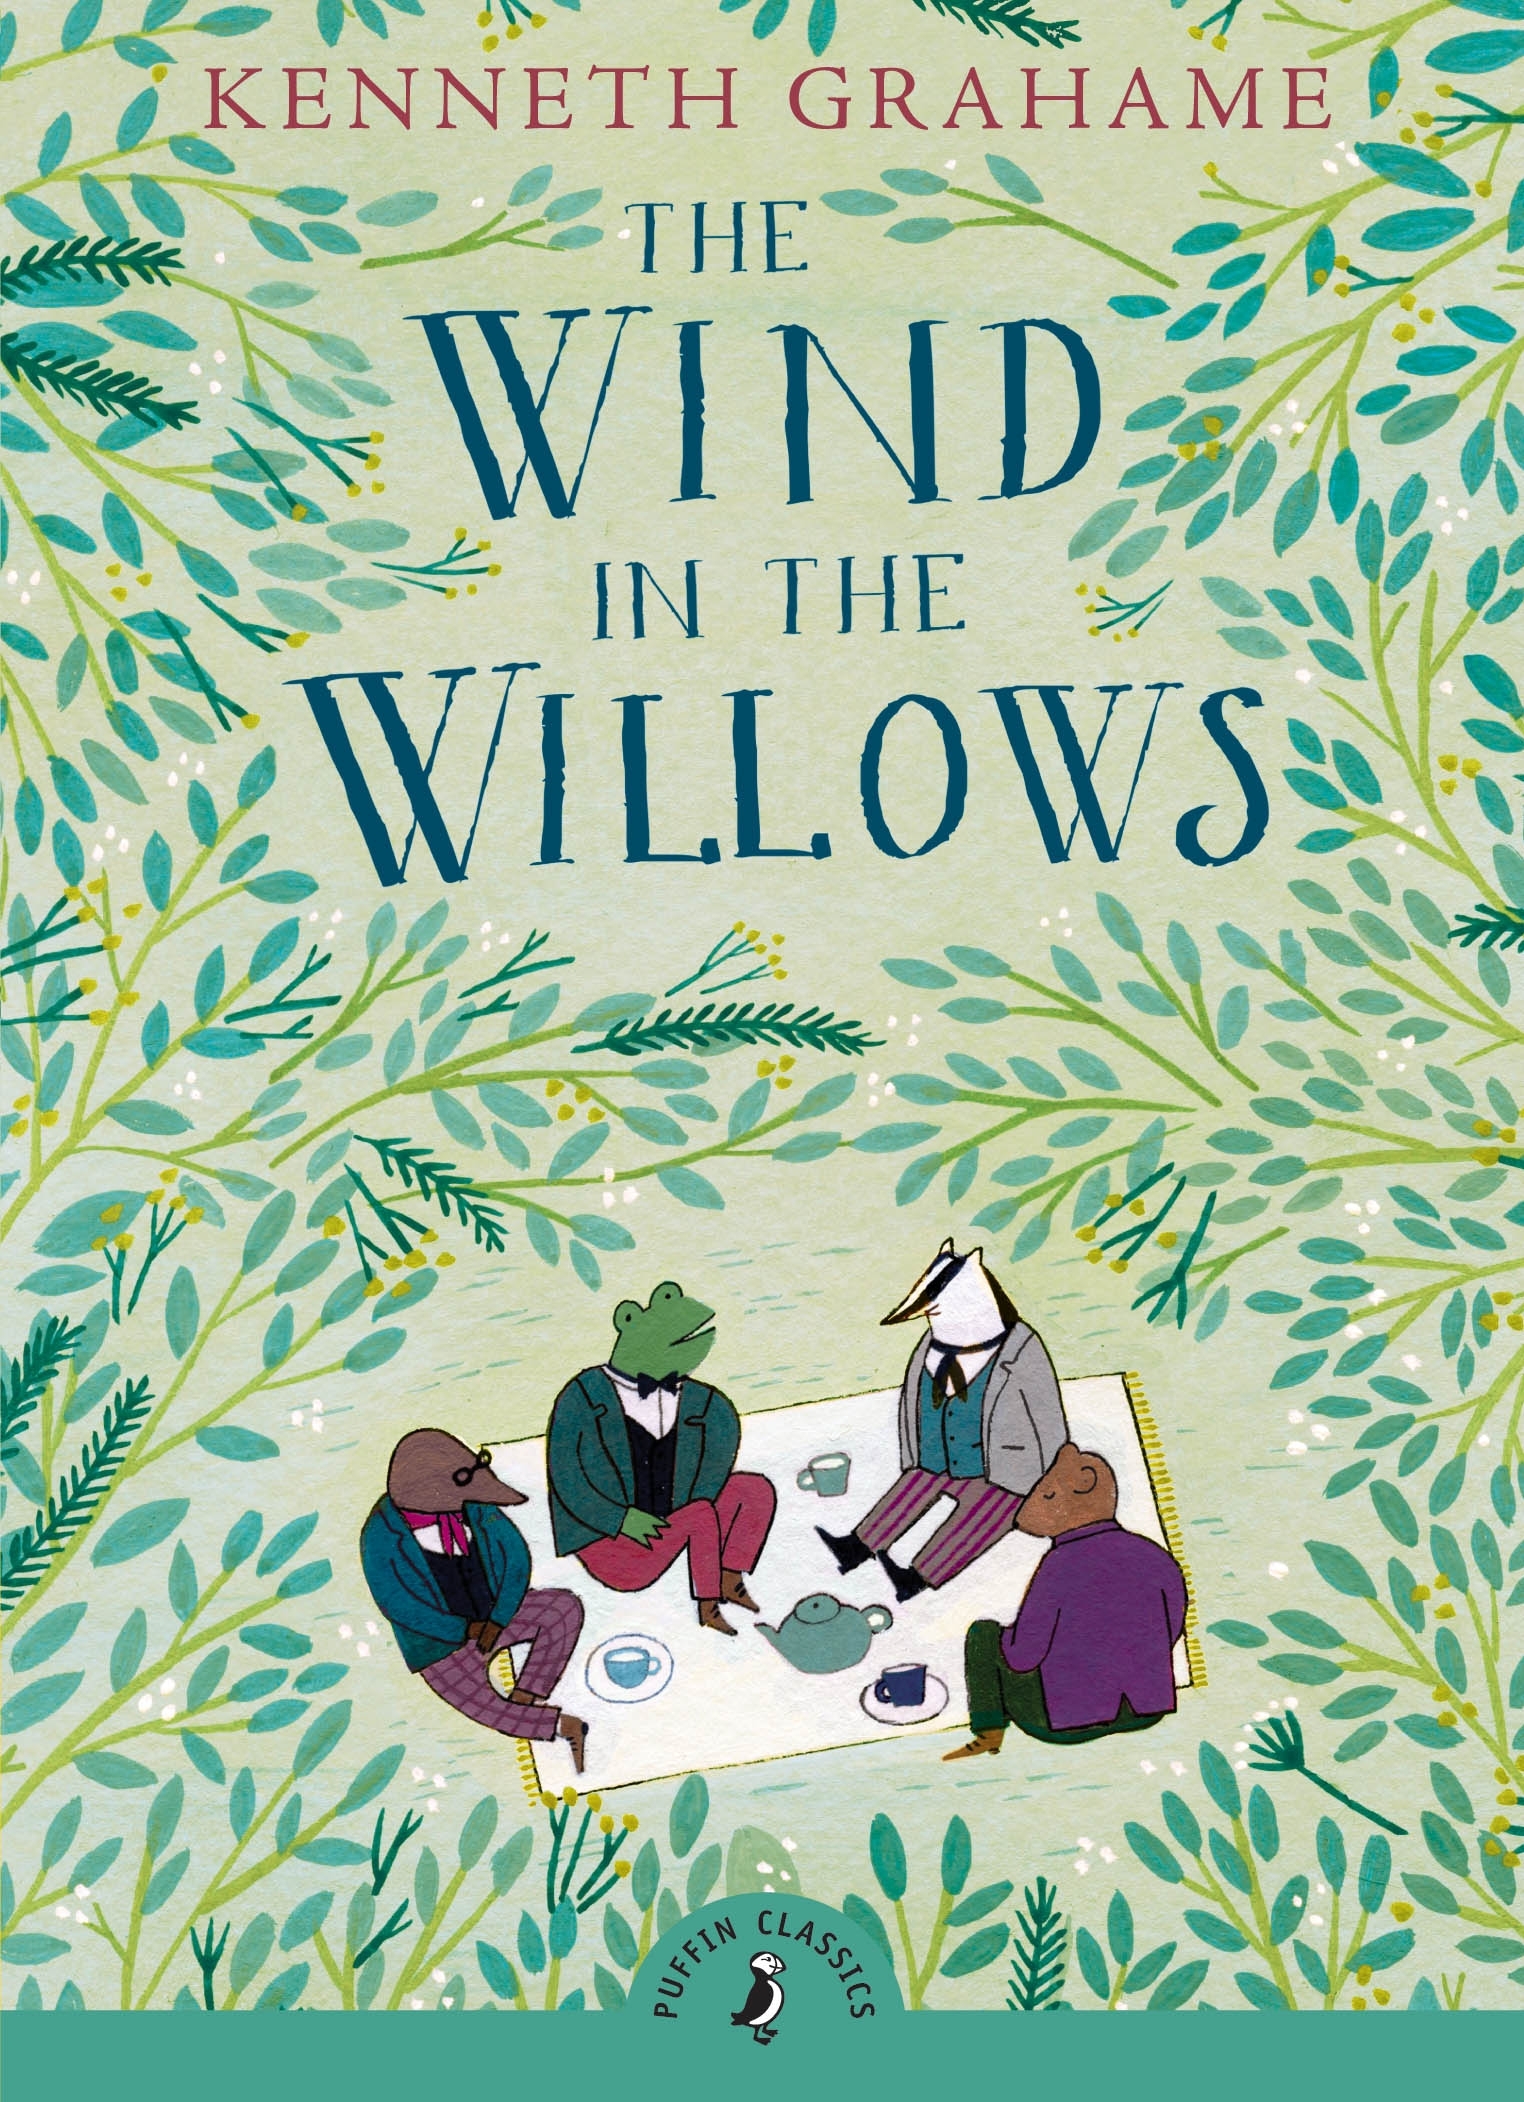 Wind In The Willows by Kenneth Grahame - Penguin Books Australia